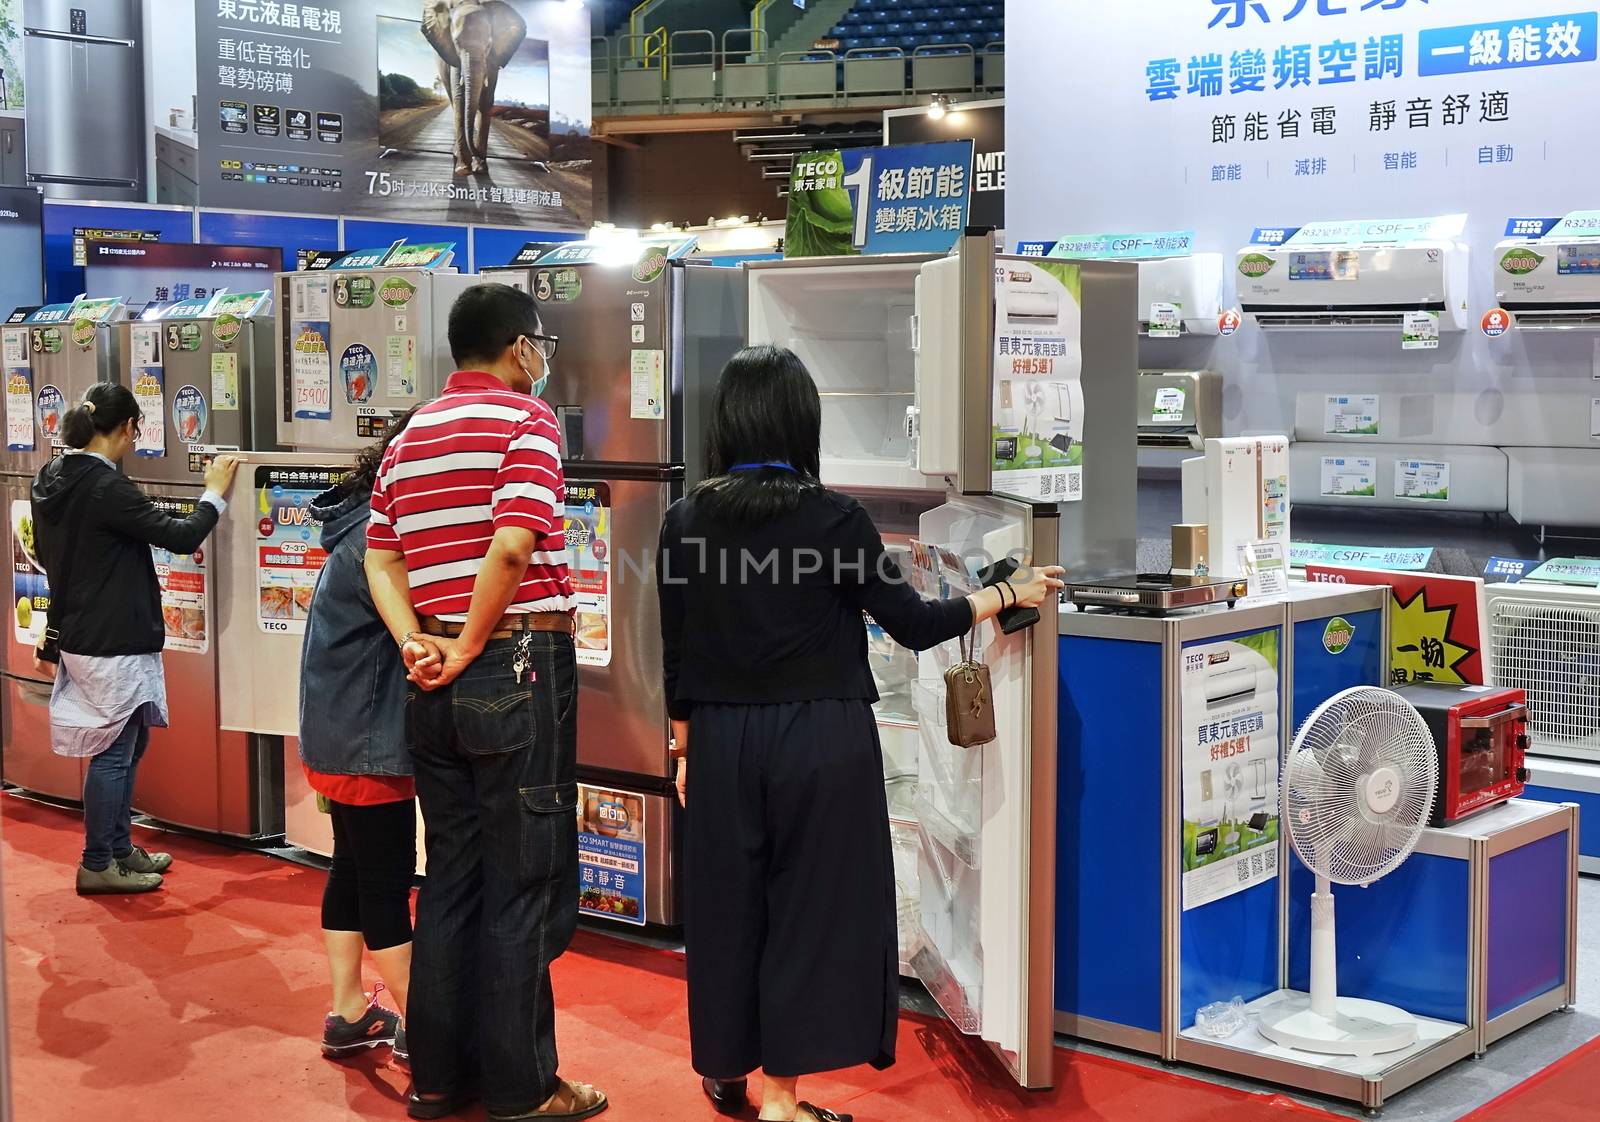 KAOHSIUNG, TAIWAN -- APRIL 5, 2019: Visitors at a sales and promotional fair for electric household appliances look at refrigerators.